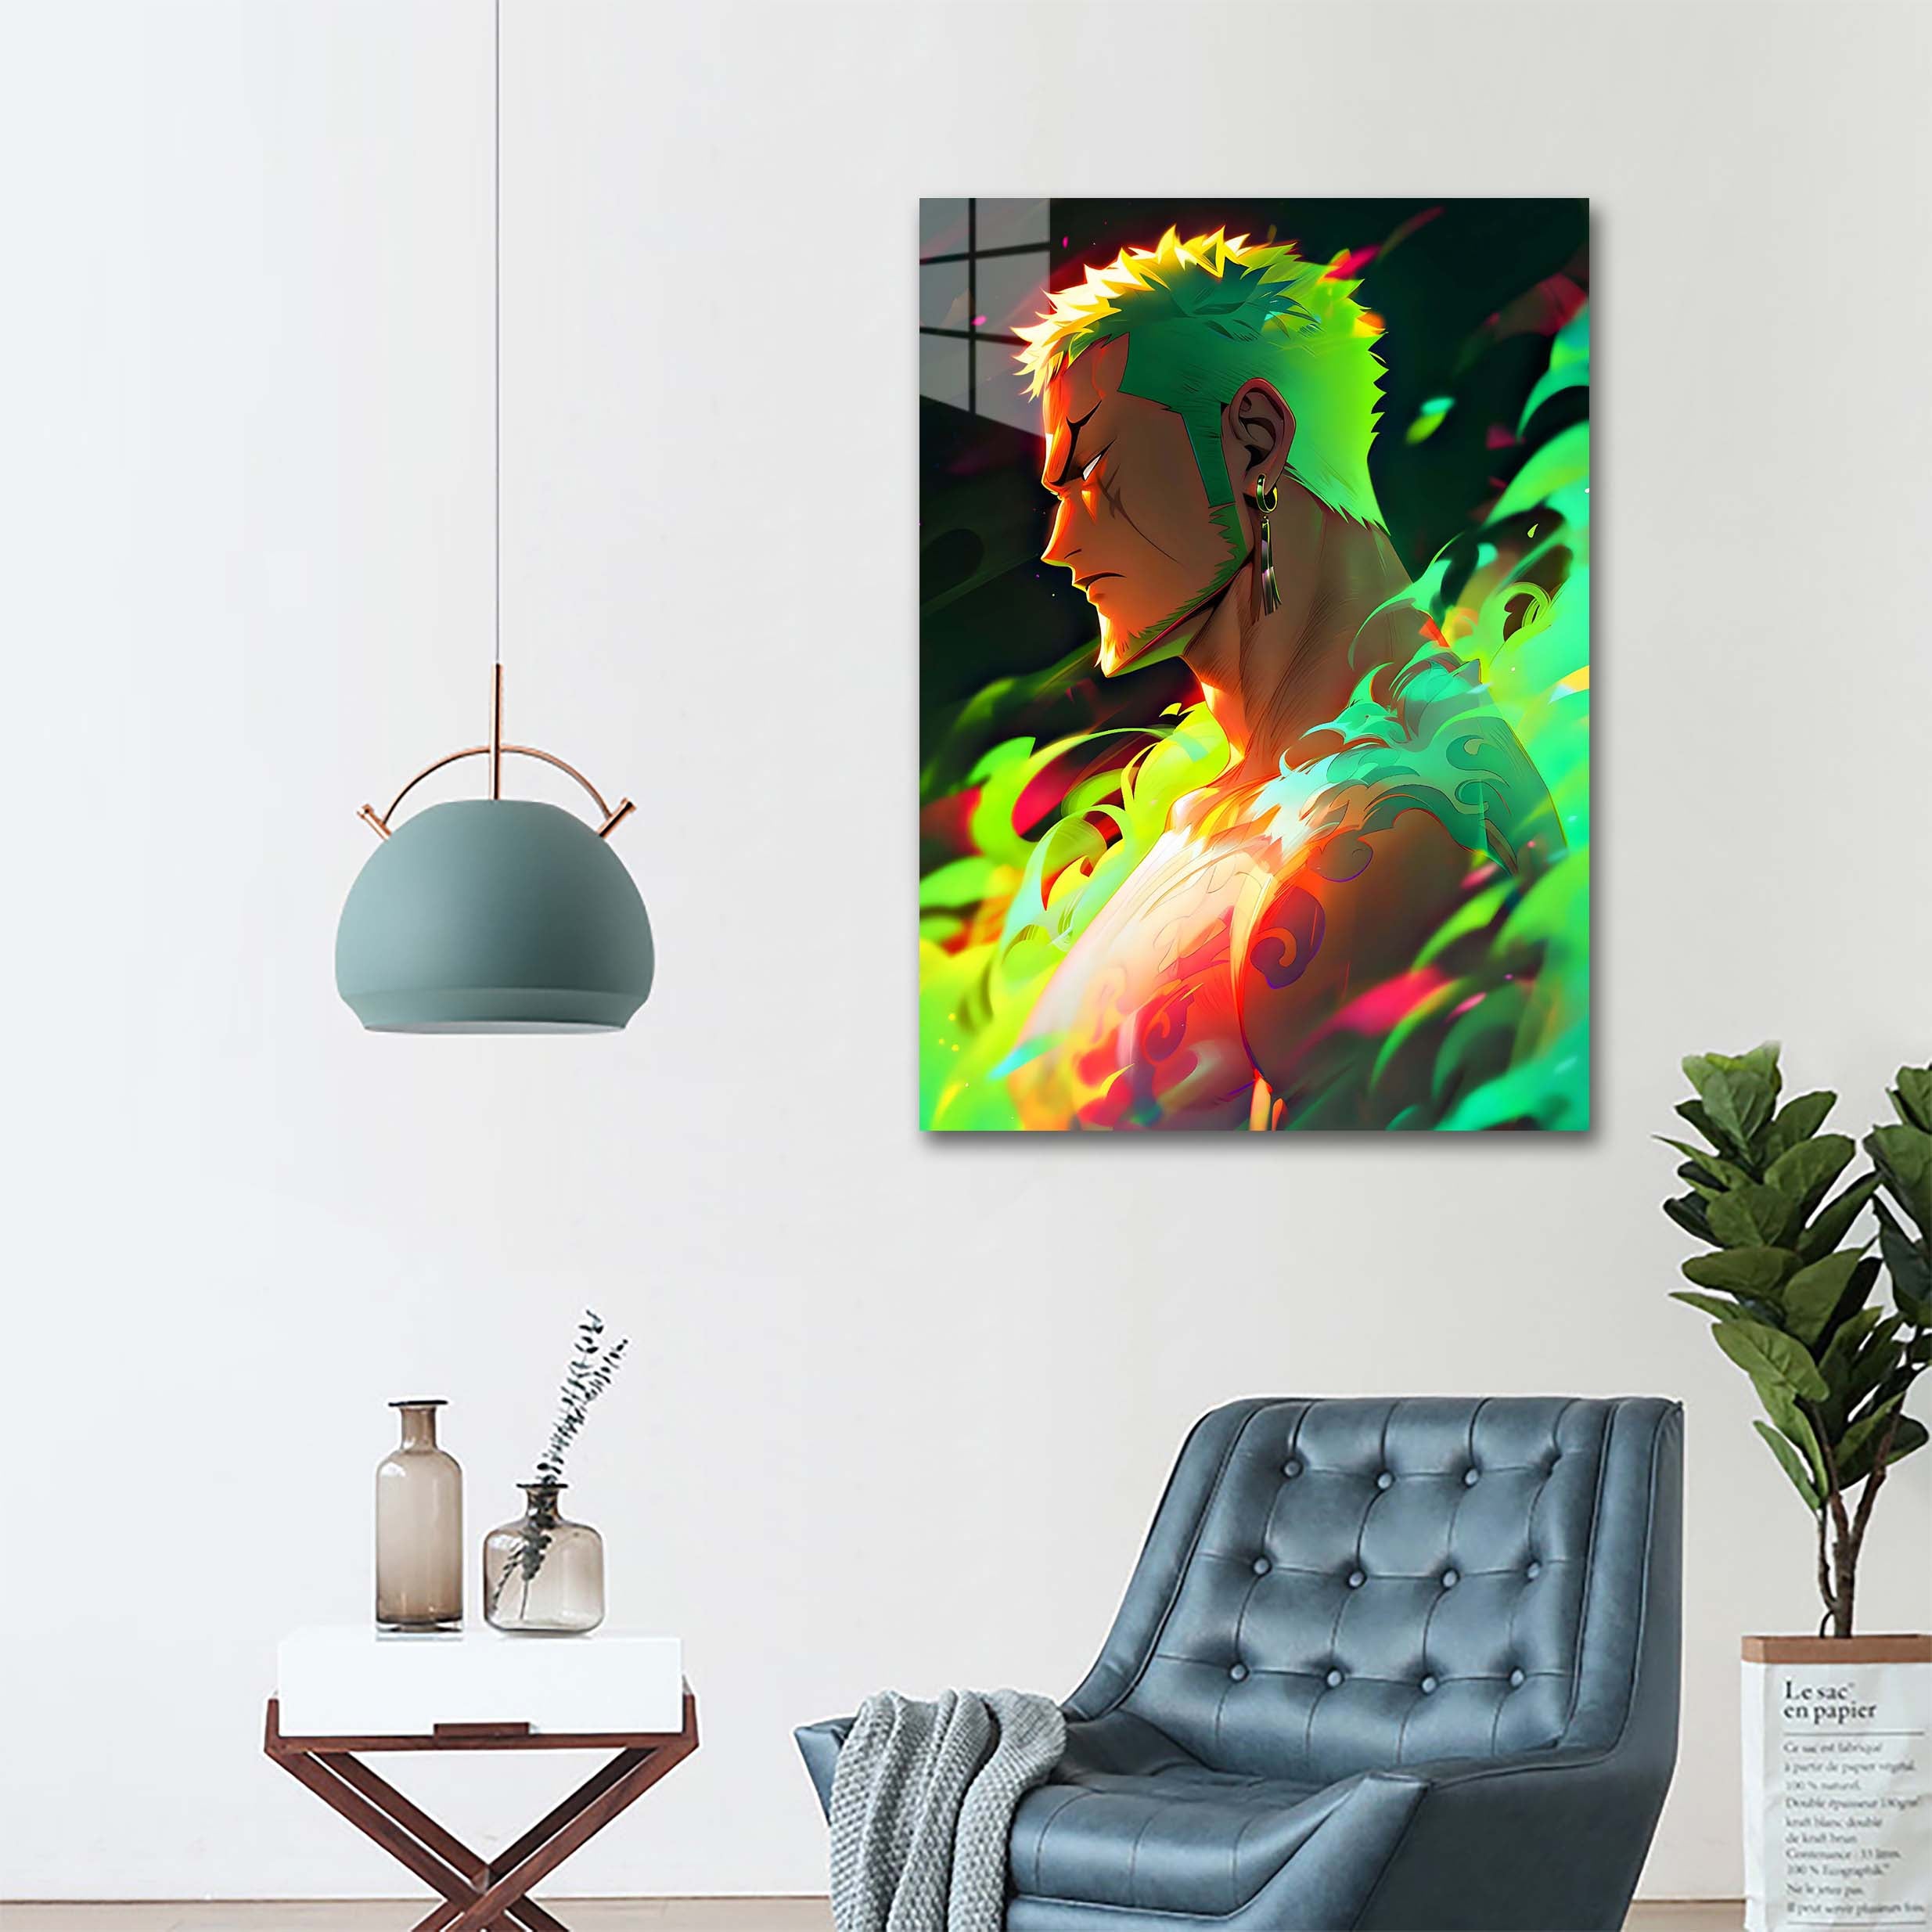 Roronoa Zoro from one piece anime-designed by @Vid_M@tion